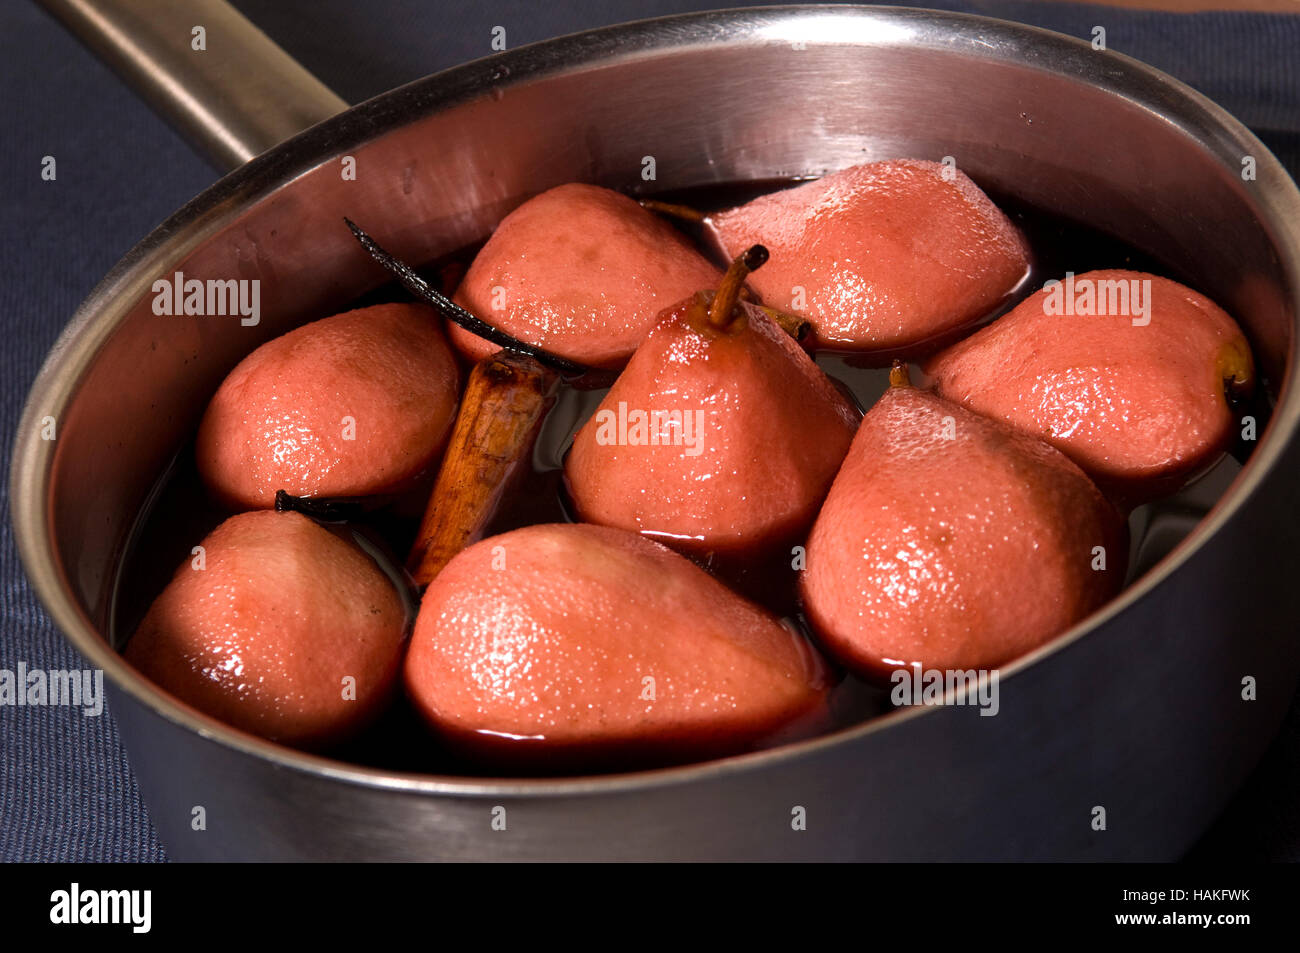 images of stewing